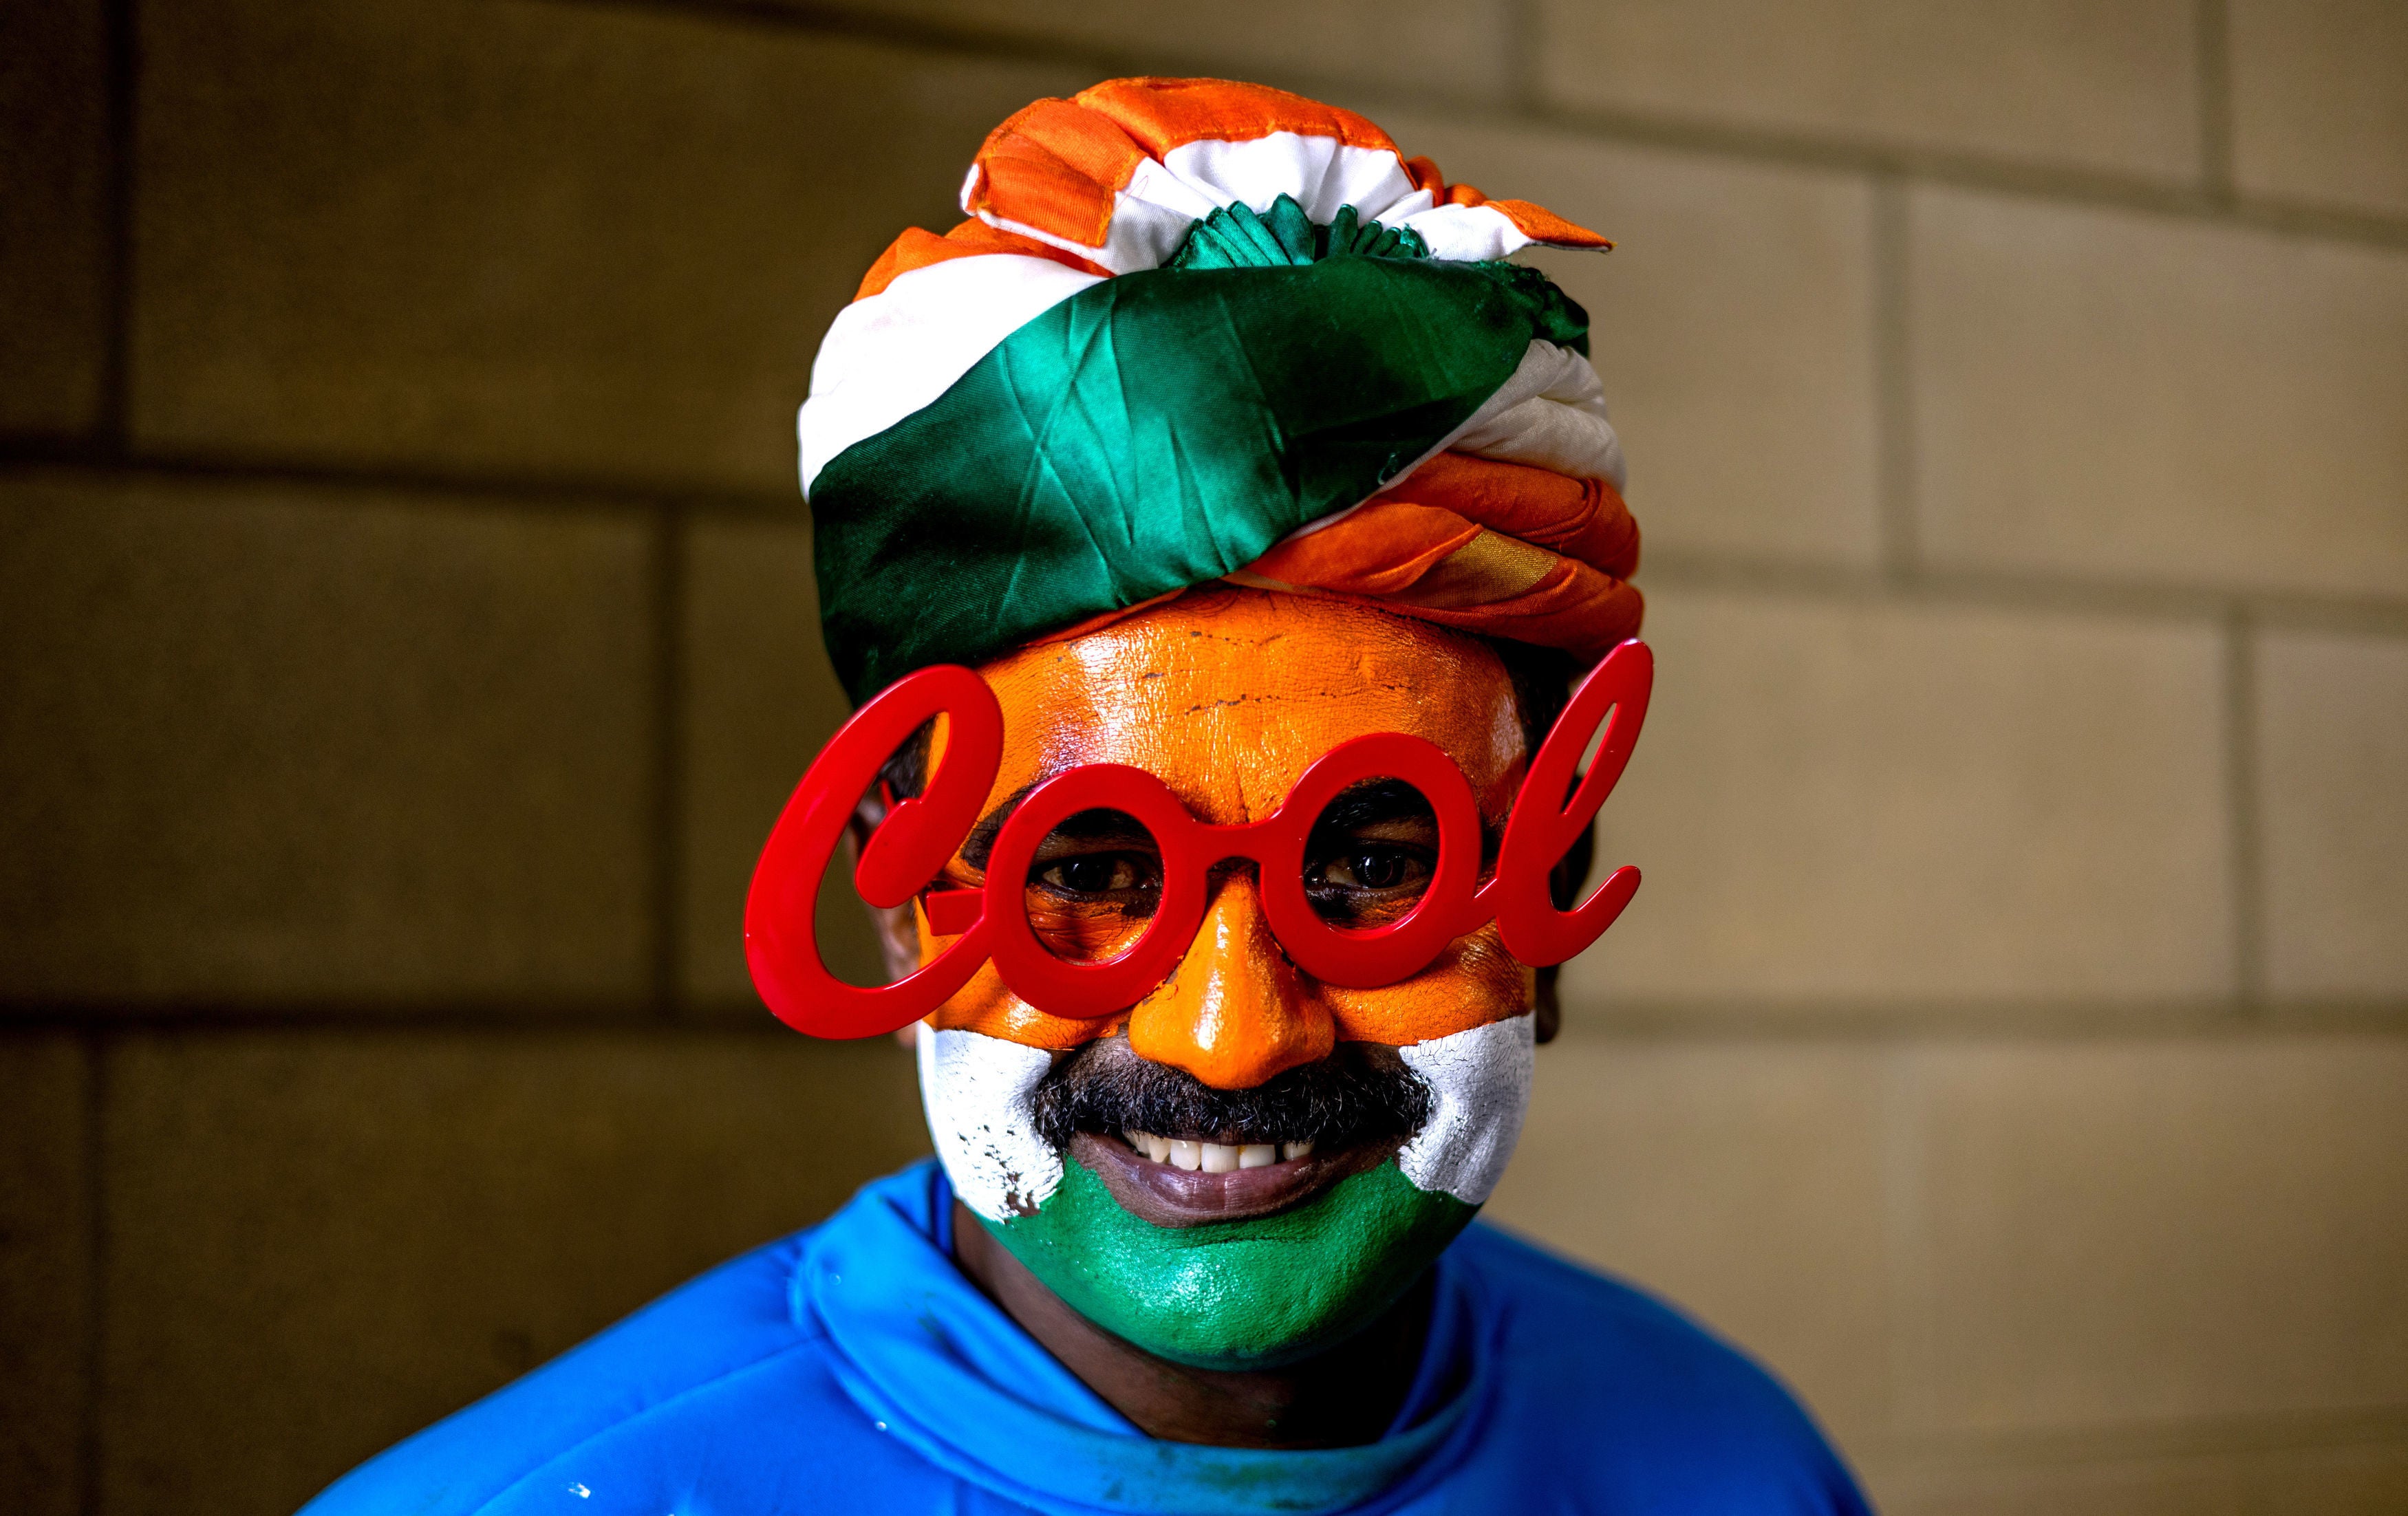 An India fan during day one of the ICC World Test Championship Final match at The Oval, London on 7 June